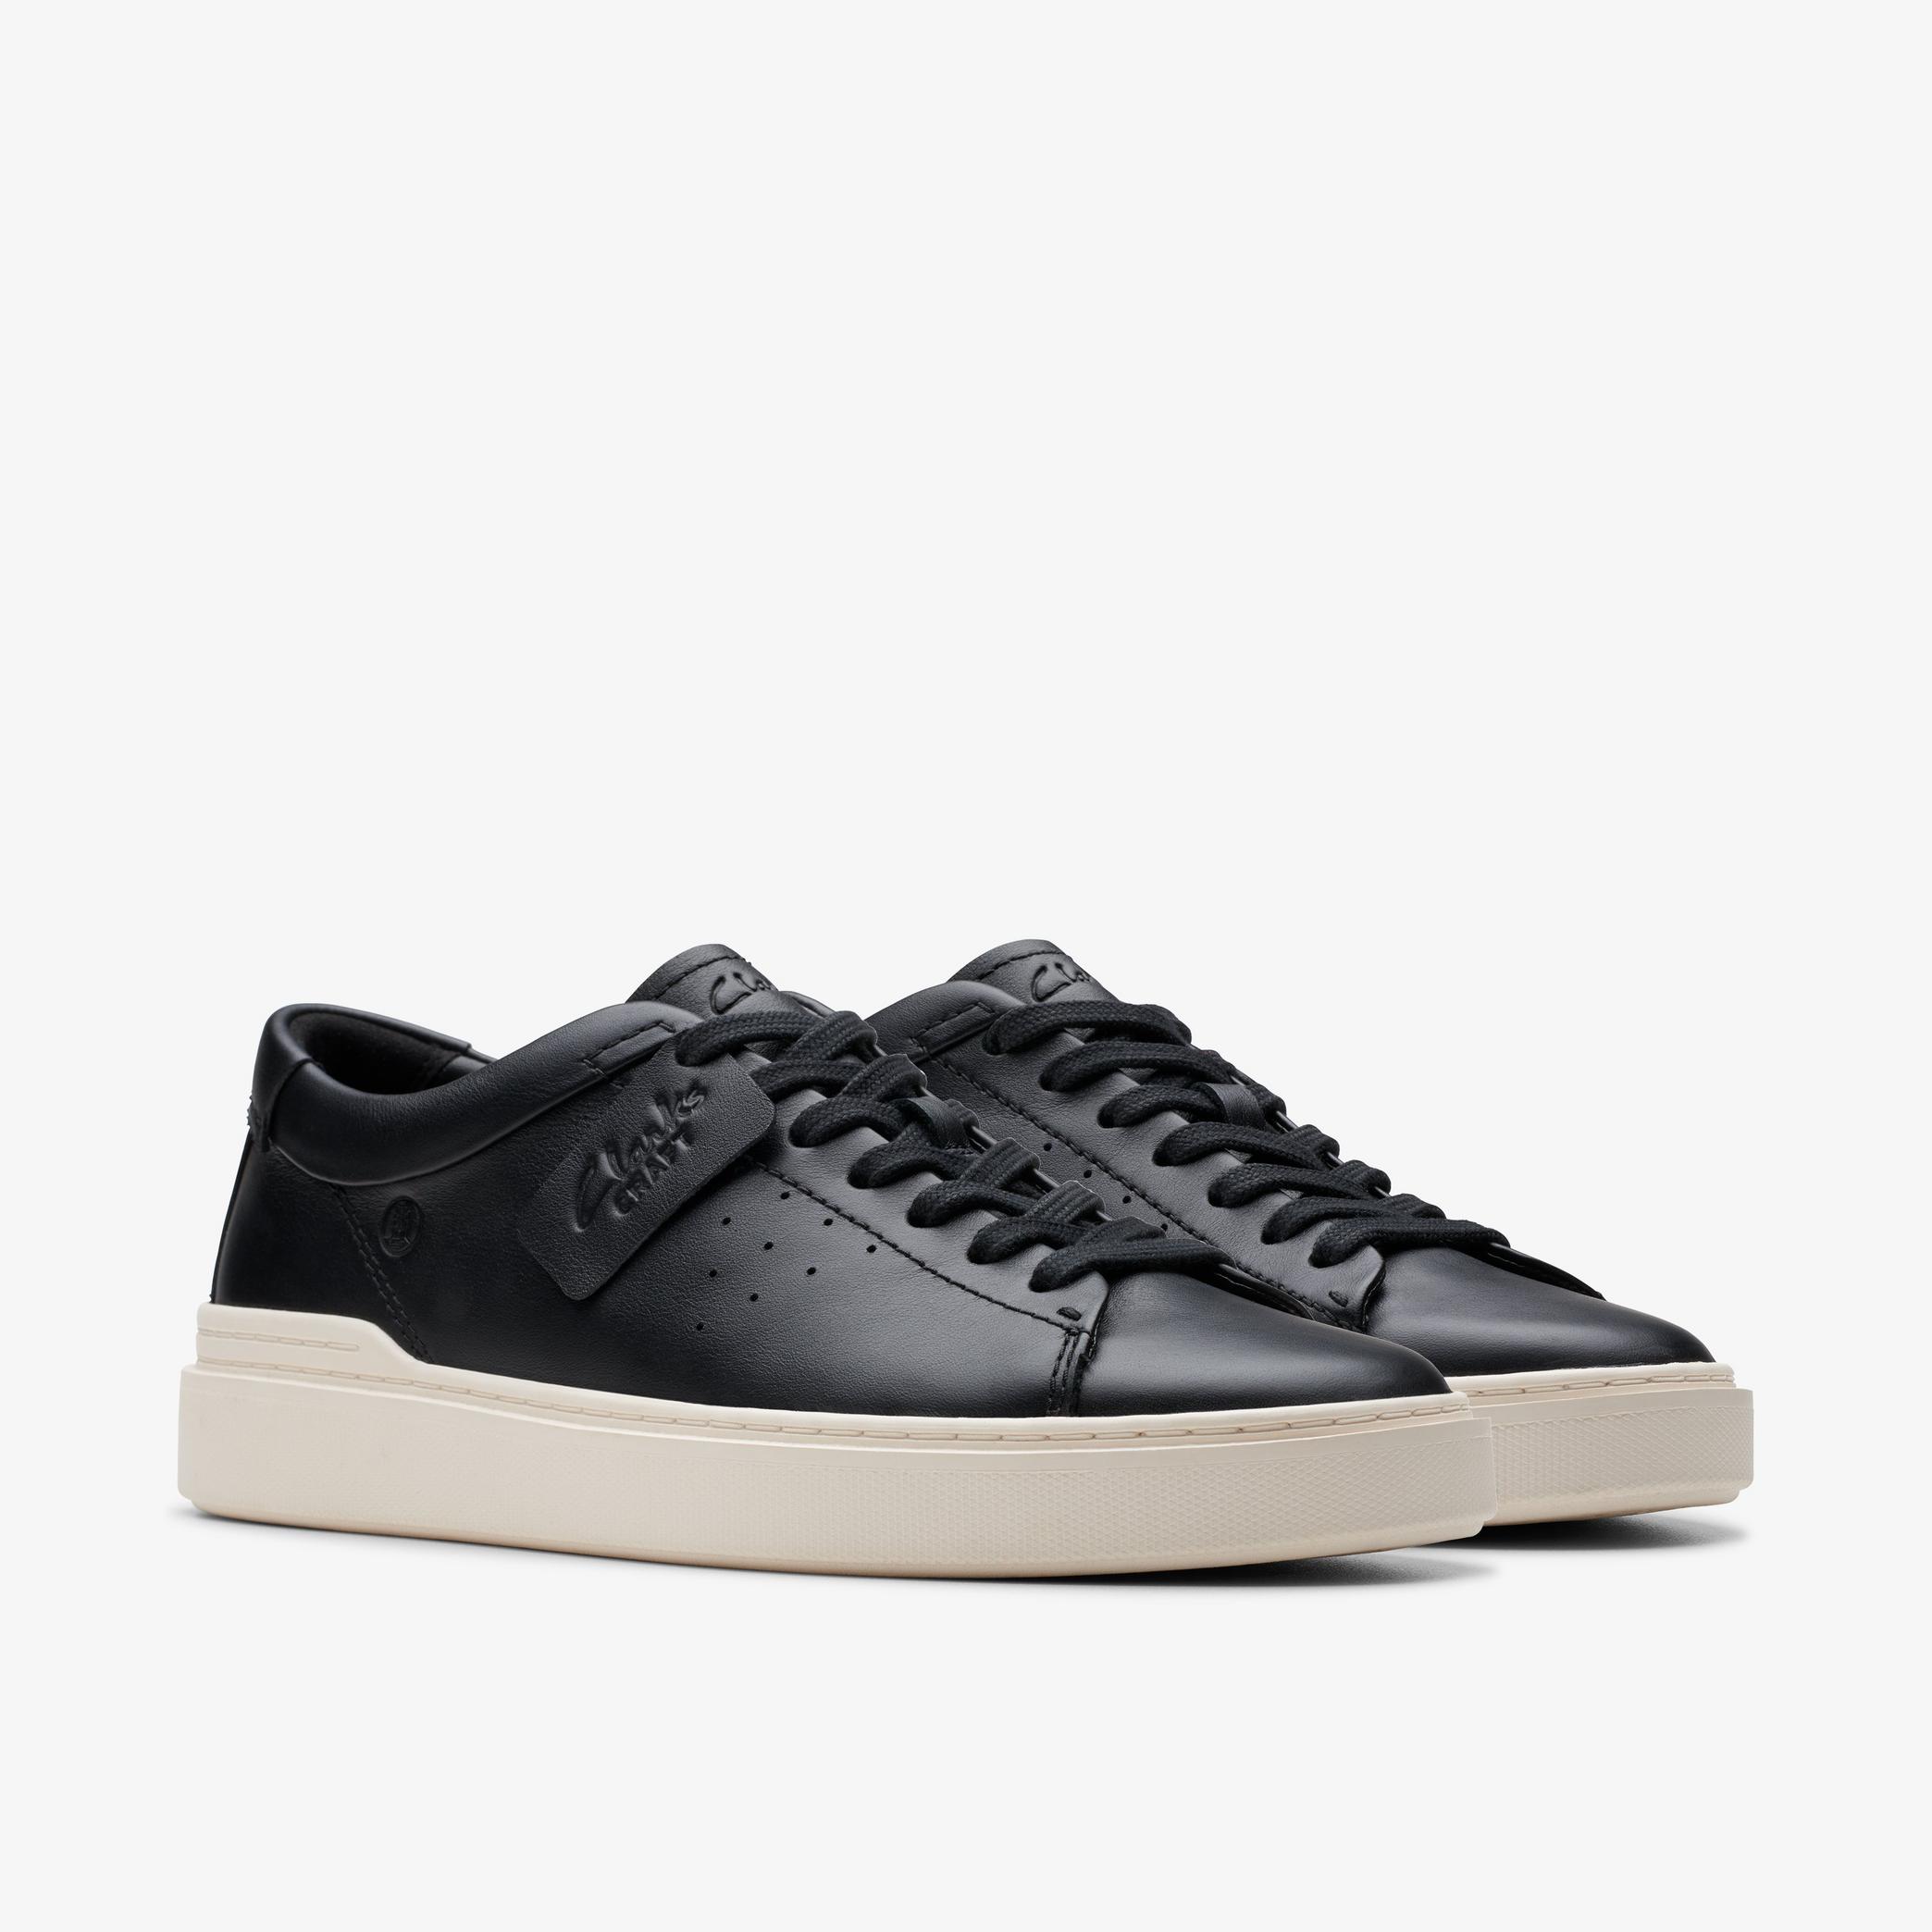 Craft Swift Black Leather Sneakers, view 4 of 6